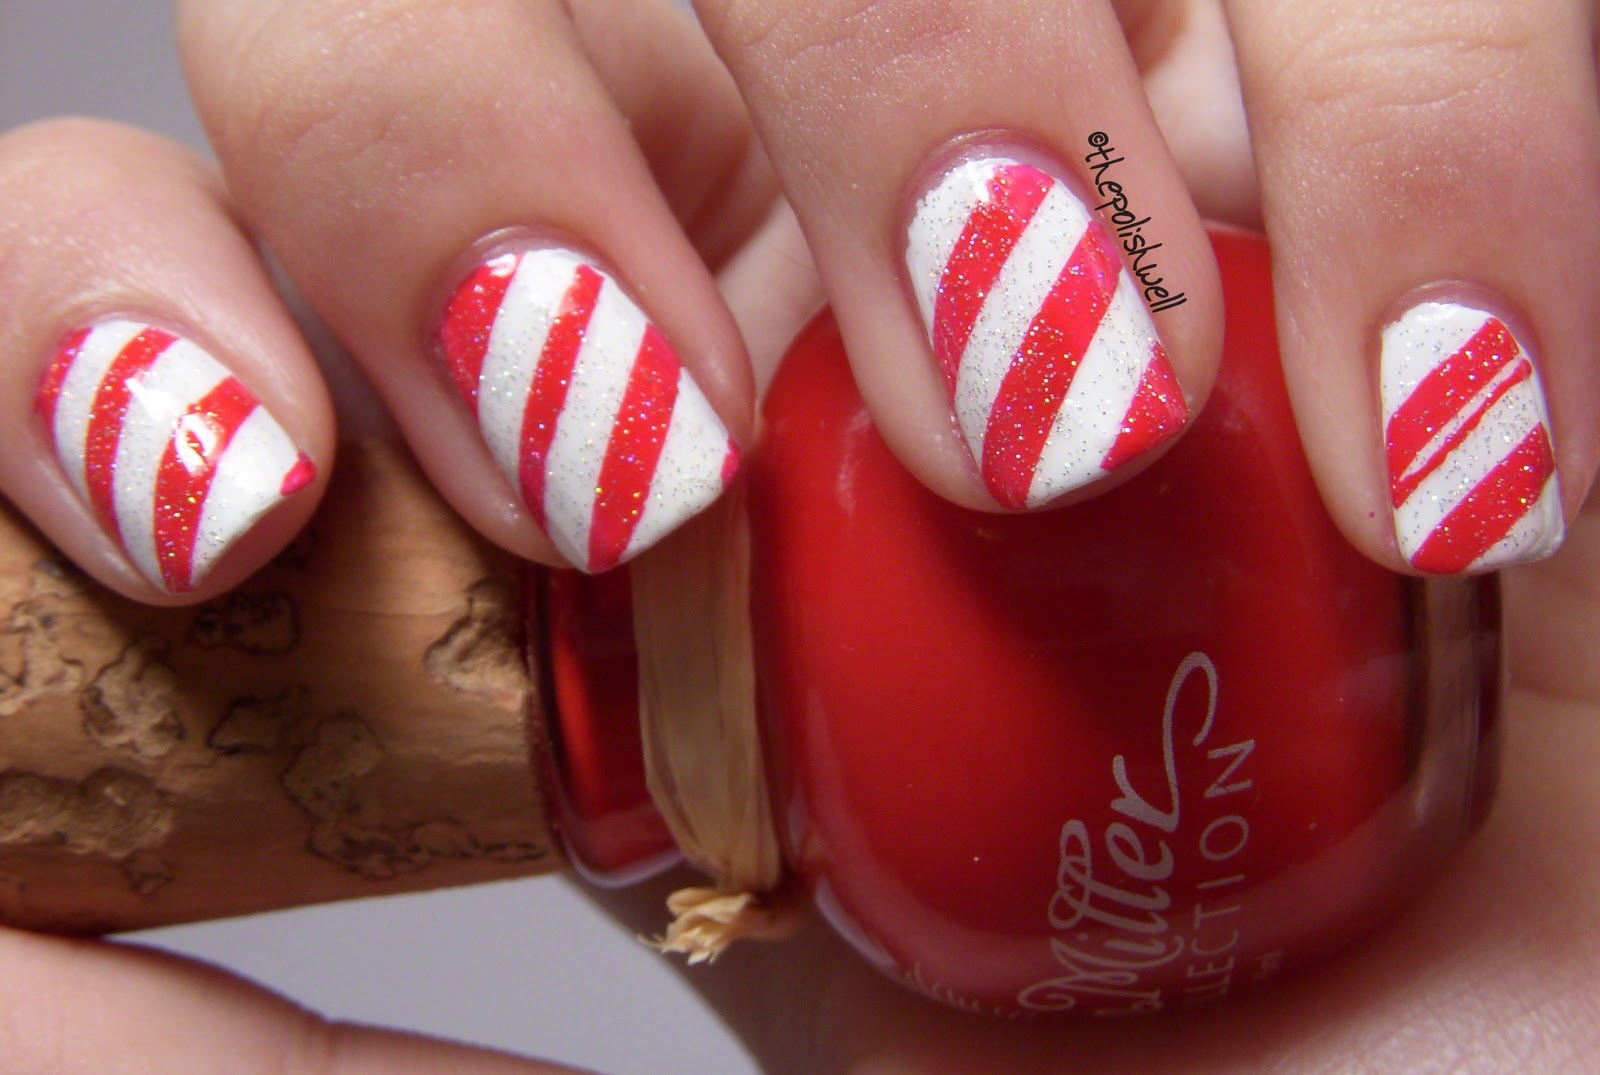 6. Sparkly Candy Cane Nail Art - wide 3